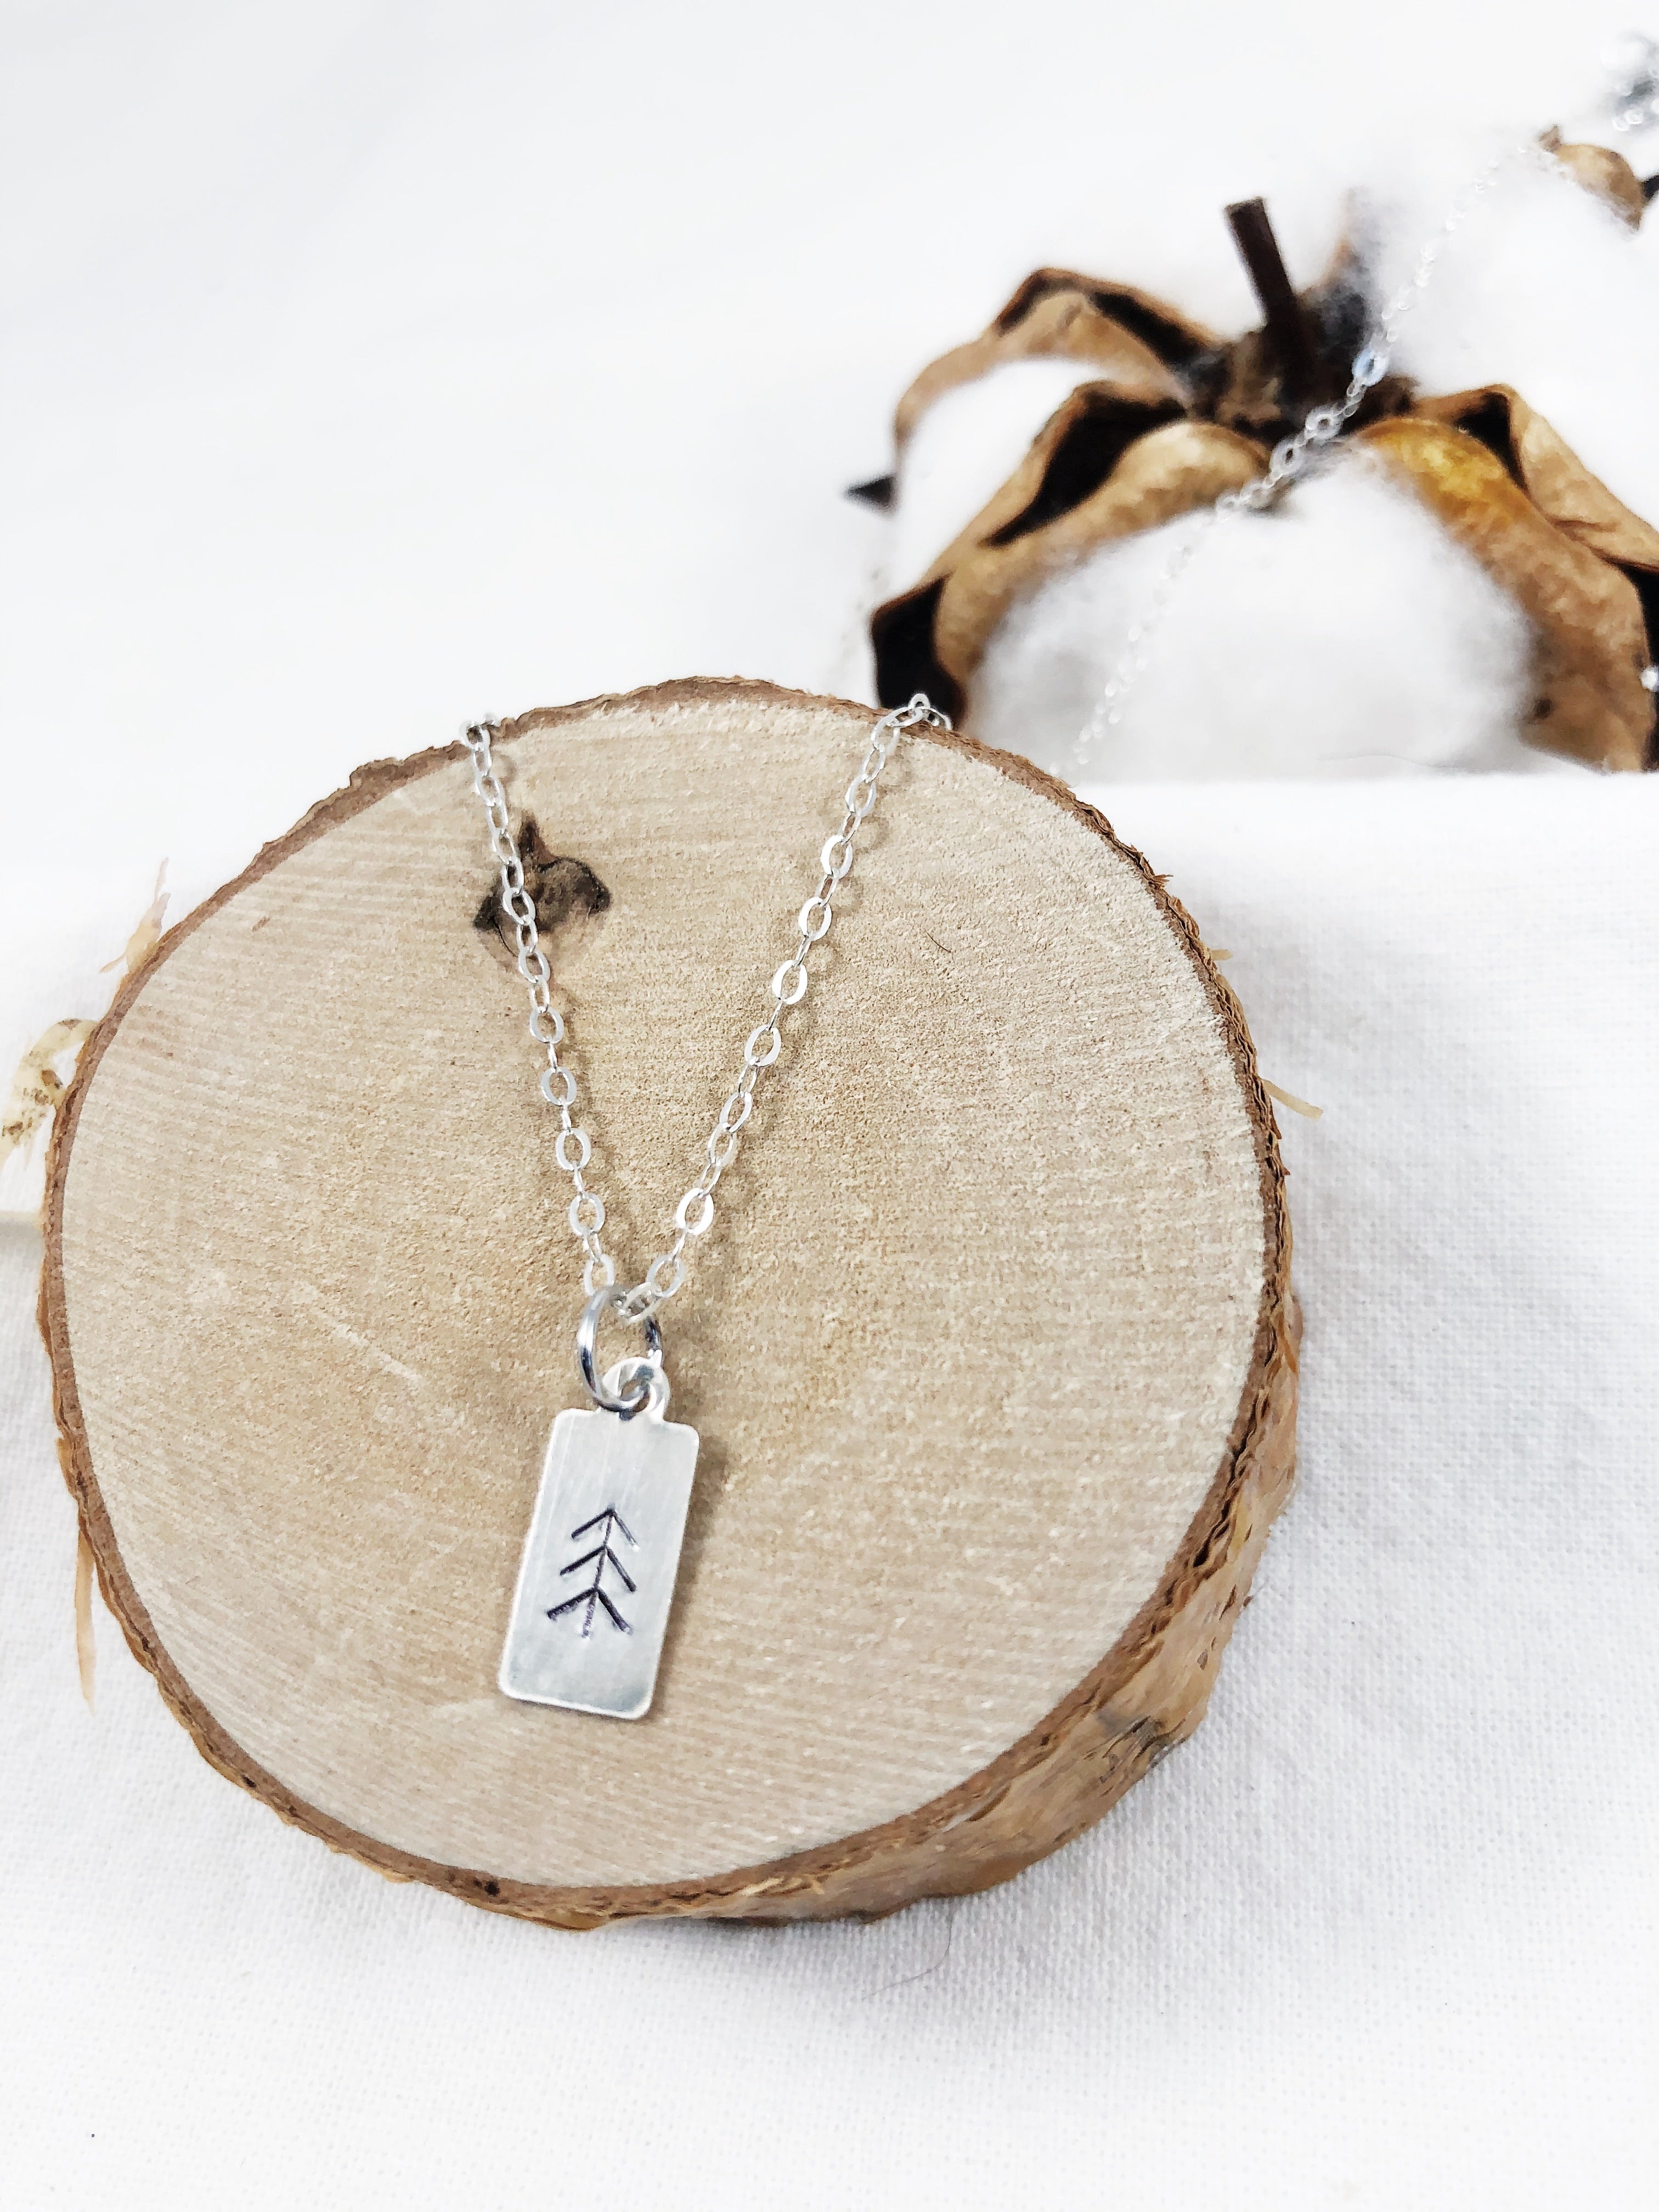 Take a Hike - Minimalist Collection - STERLING SILVER